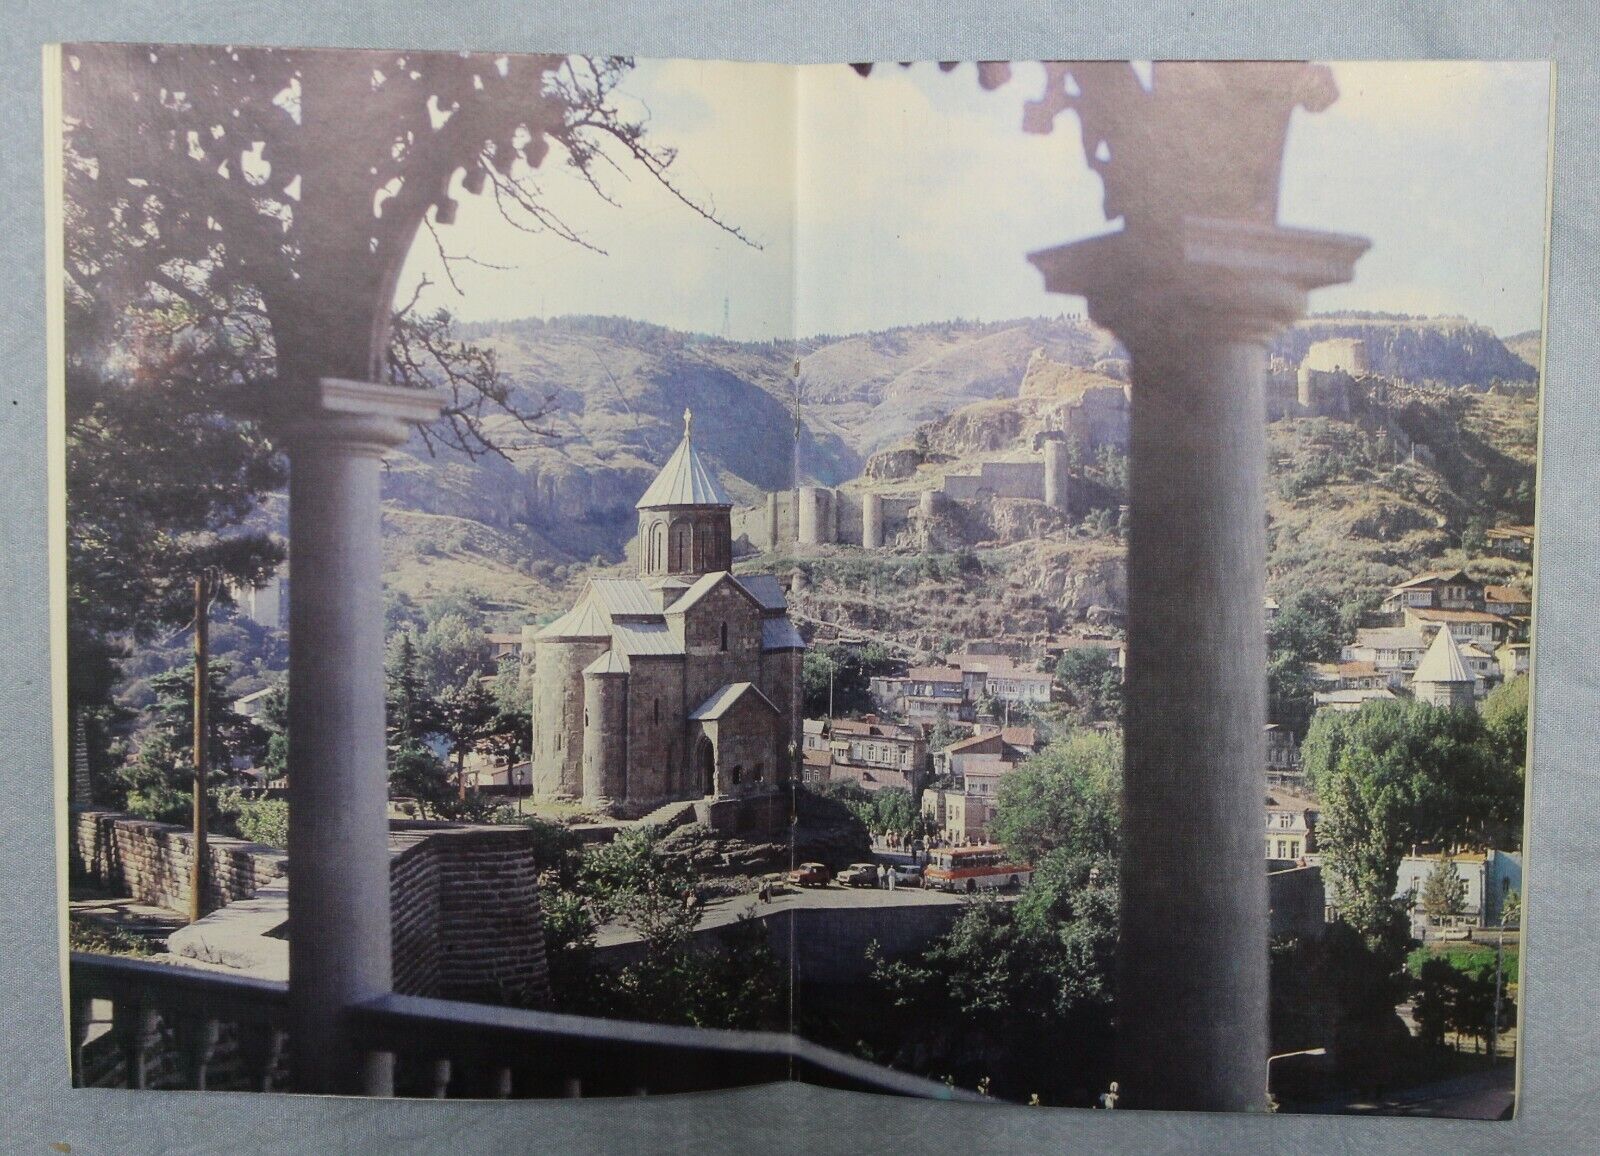 11105.Chess book: Results Of The International Chess Competition w Photos Tbilisi 1989